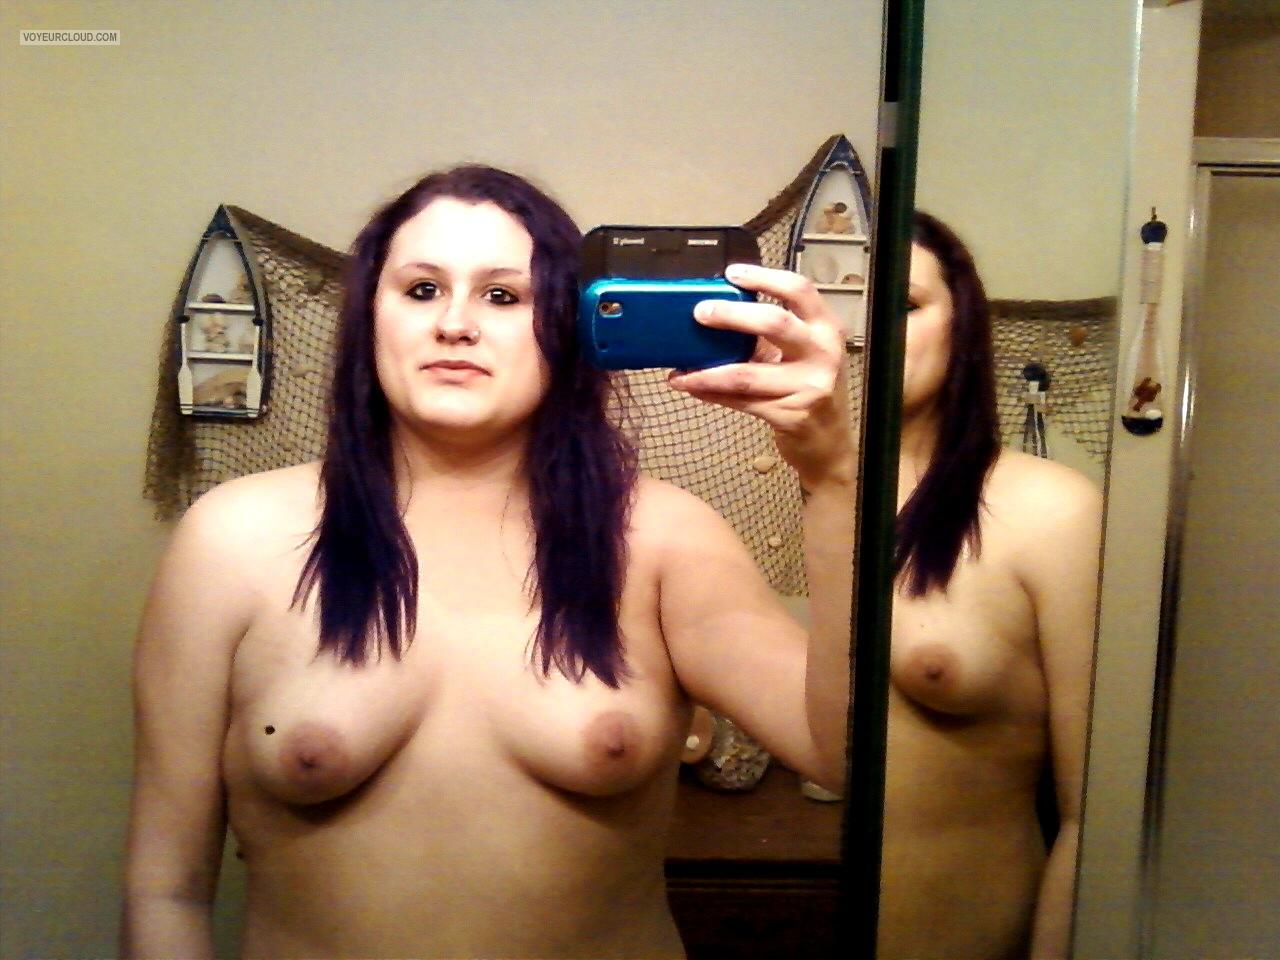 Tit Flash: My Small Tits (Selfie) - Topless Sarah from United States